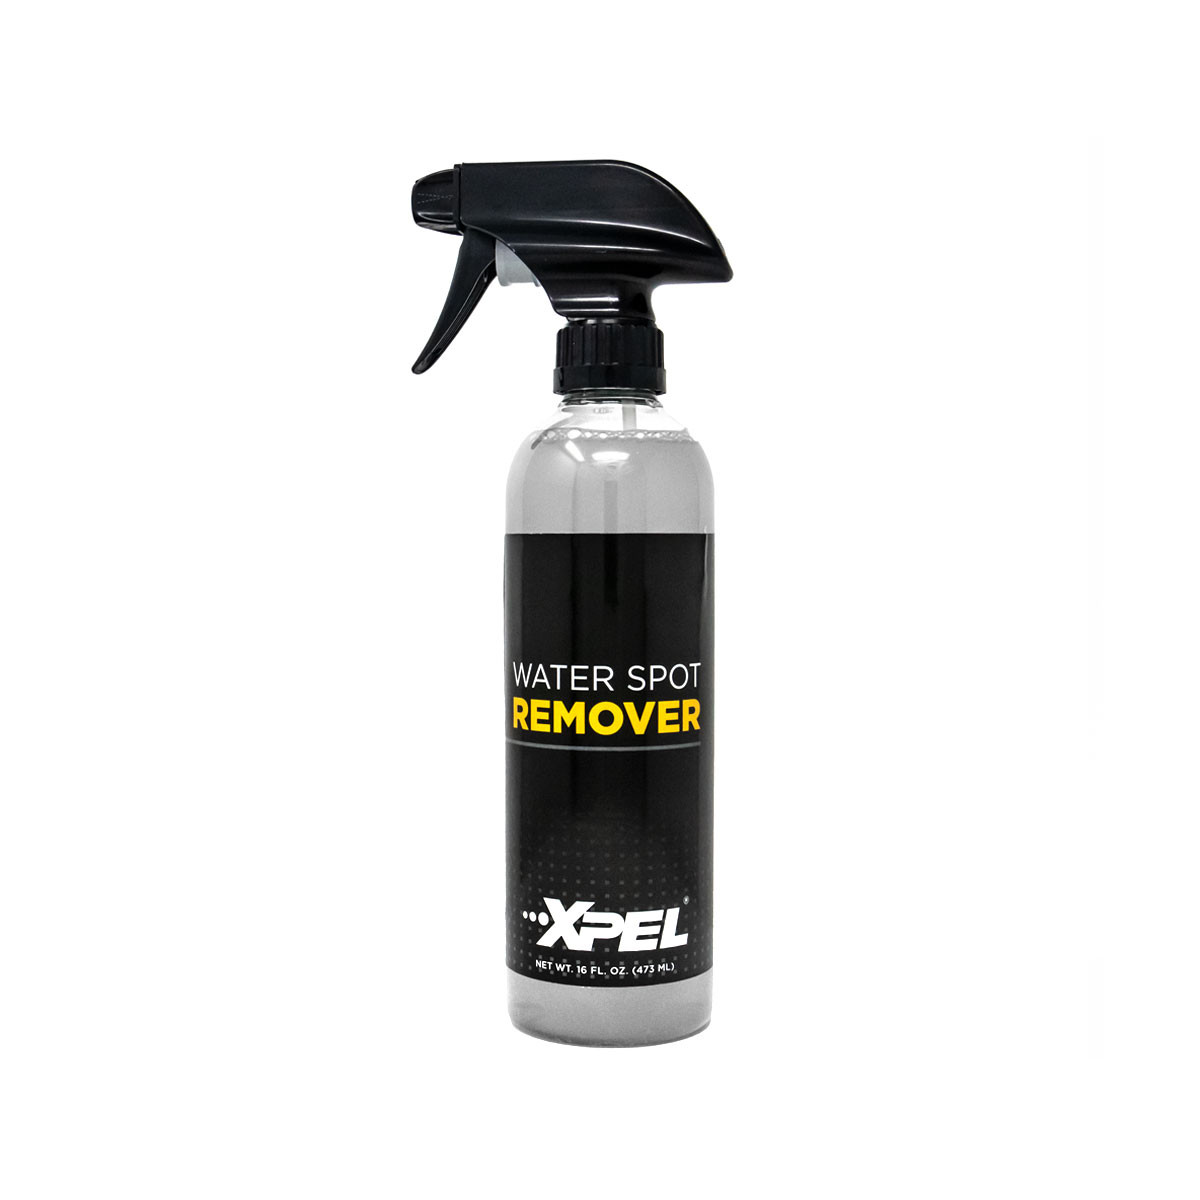 XPEL Waterspot remover